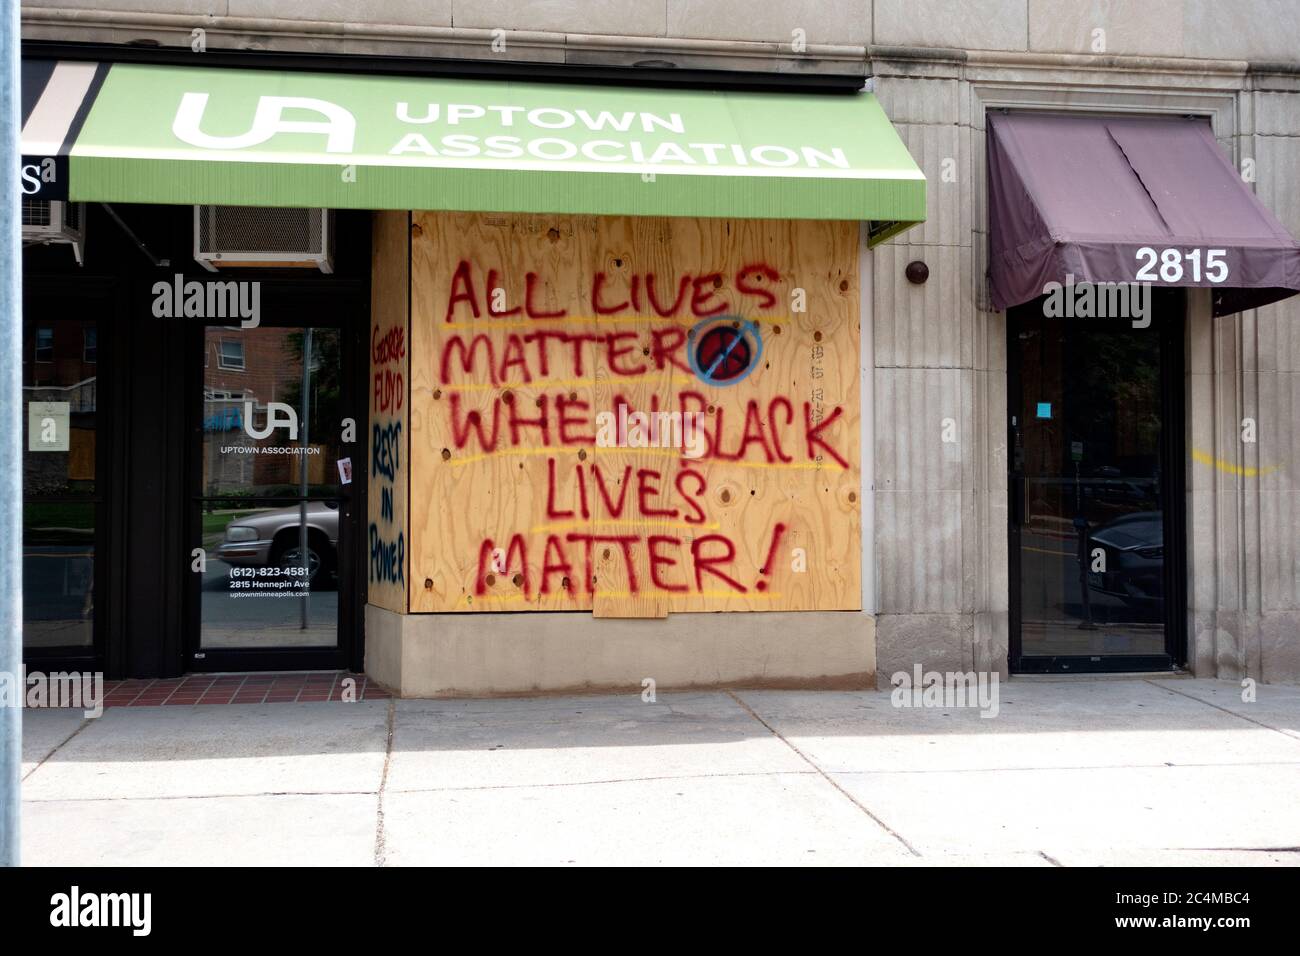 All Lives Matter when Black Lives Matter on plywood boarded windows of Uptown Association after George Floyd death. Minneapolis Minnesota MN USA Stock Photo